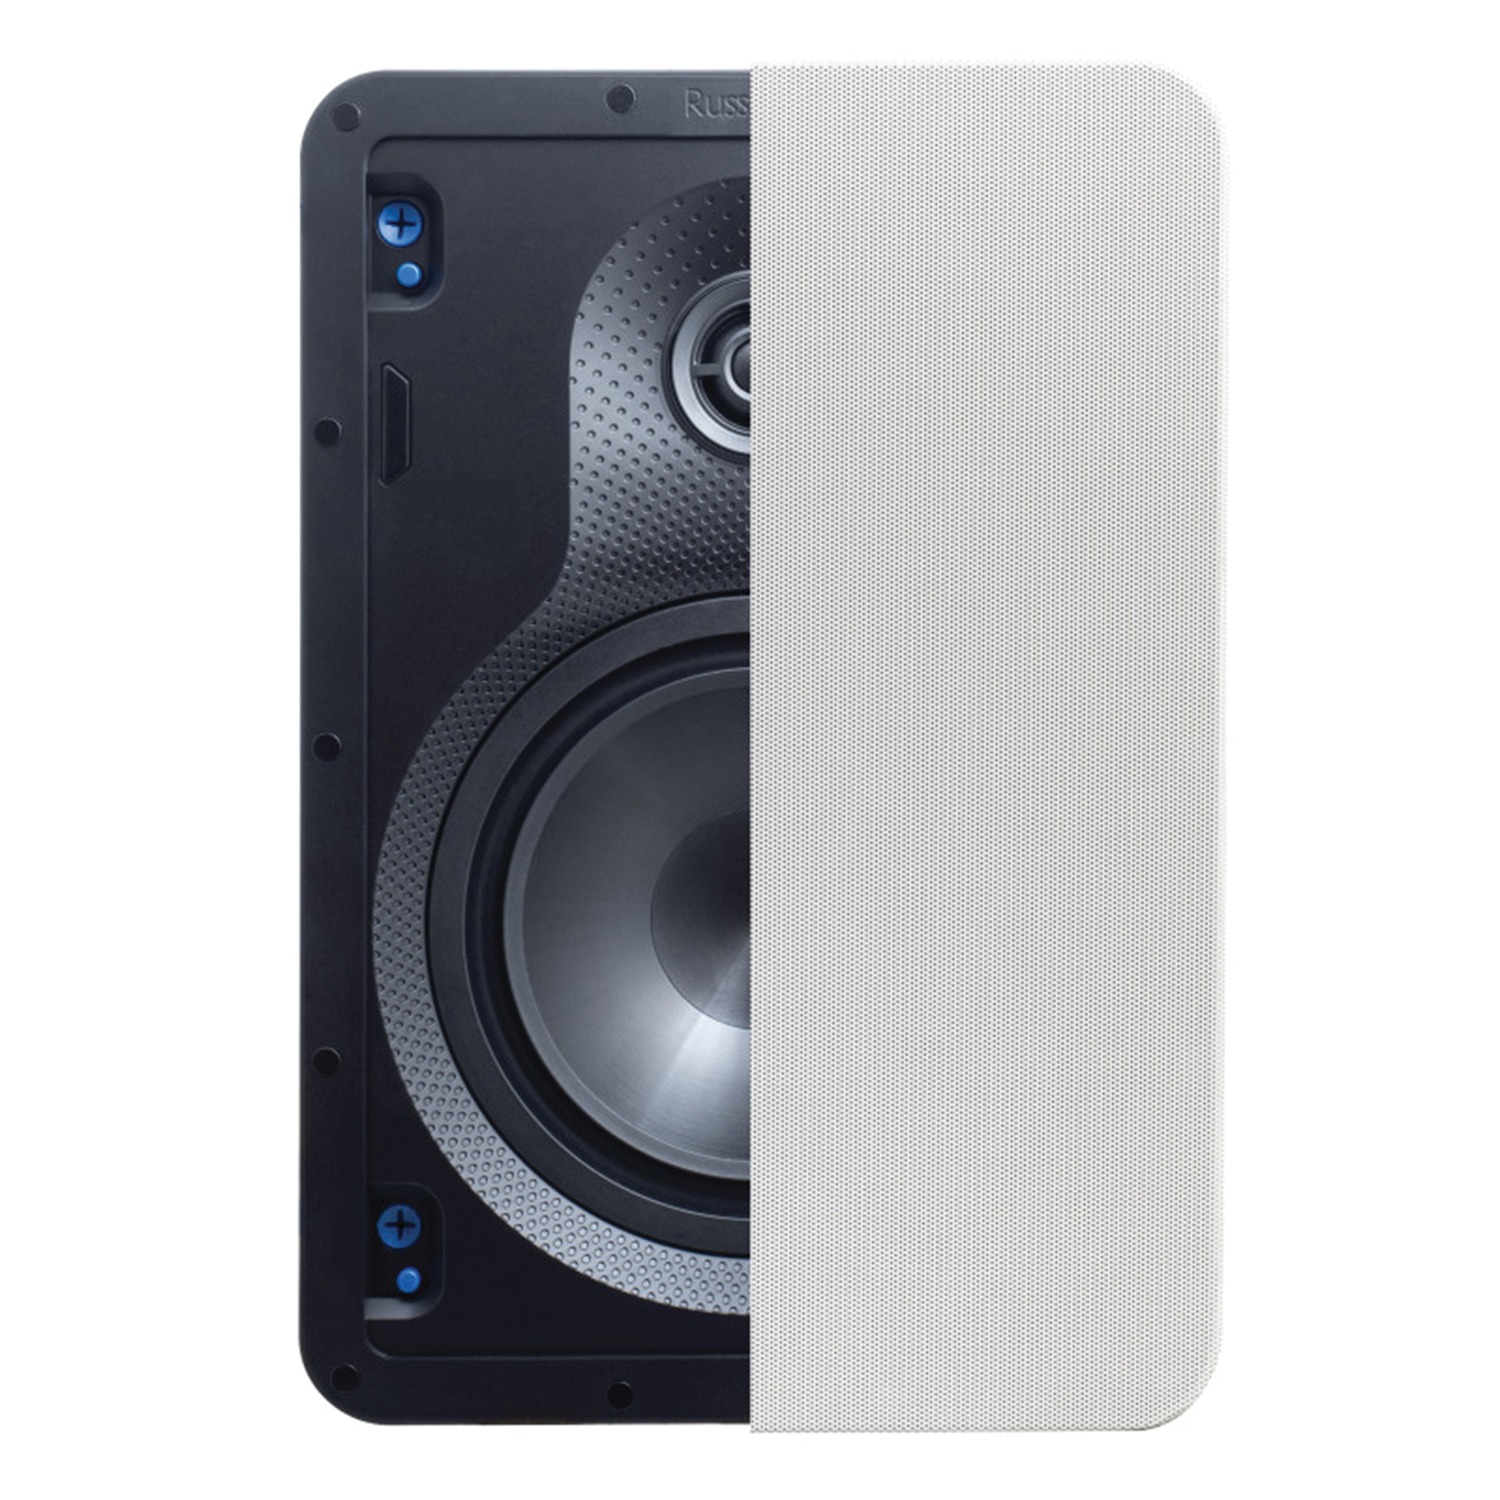 Russound IW-620 Architectural Series 6.5-Inch In-Wall Enhanced Performance 2-Way Loudspeakers - image 1 of 6